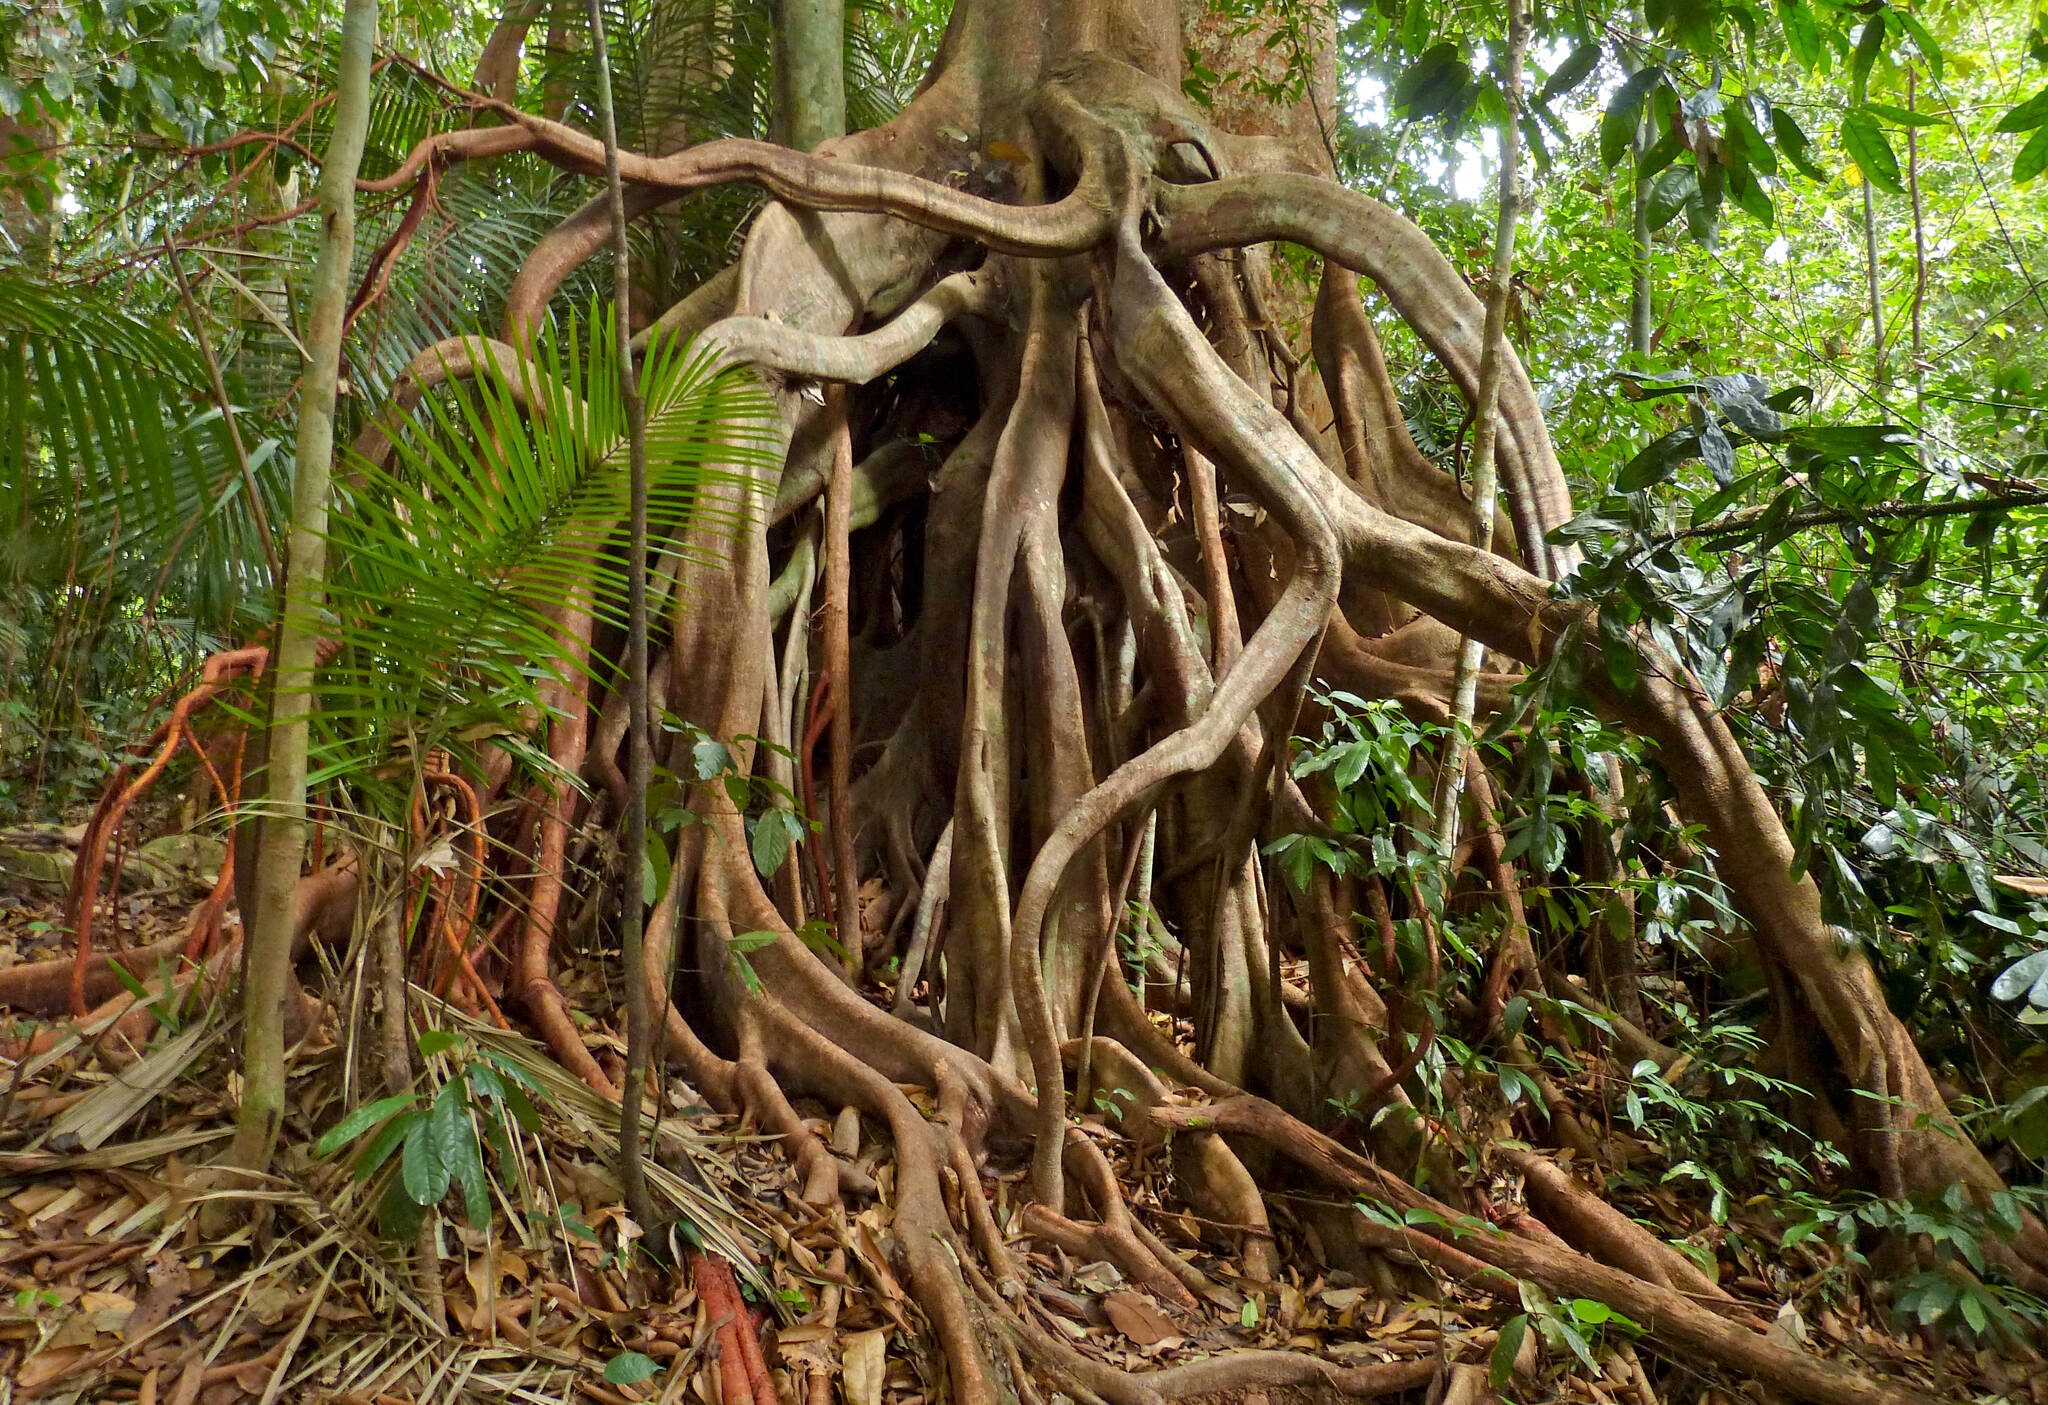 This photo available under a Creative Commons license shows the roots of a fig tree. Trunks and branches of fig trees and mangroves send down aerial roots that eventually reach the soil and serve the normal root functions of taking up water and nutrients. (Bernard Dupont / Flickr)